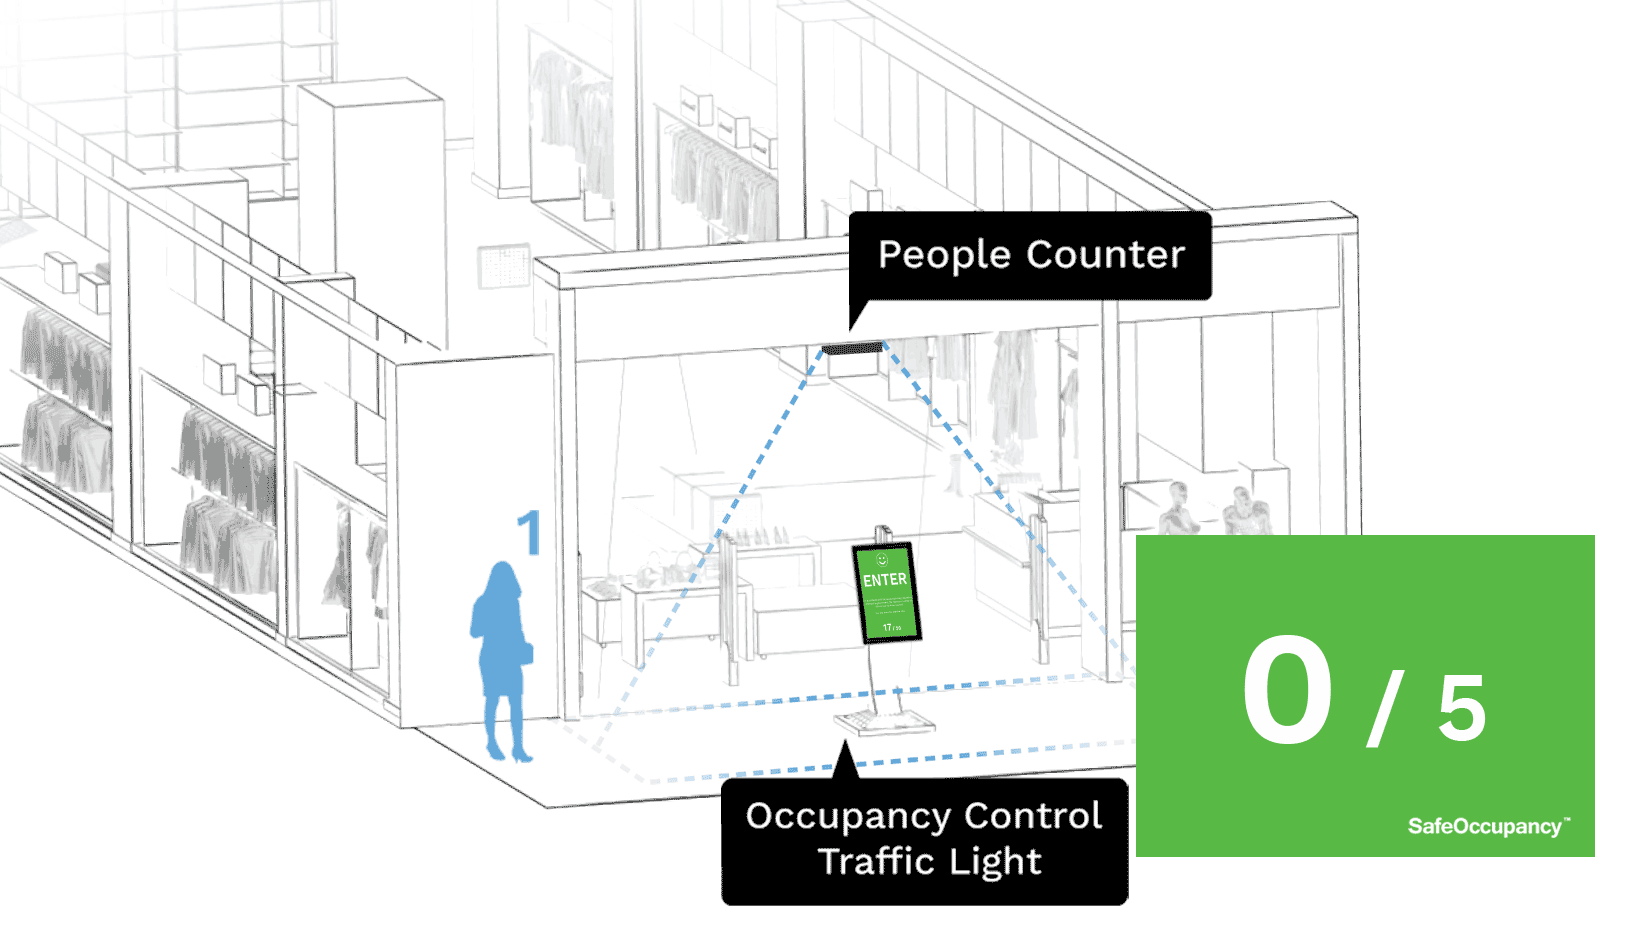 FootfallCam People Counting System - Occupancy Counting